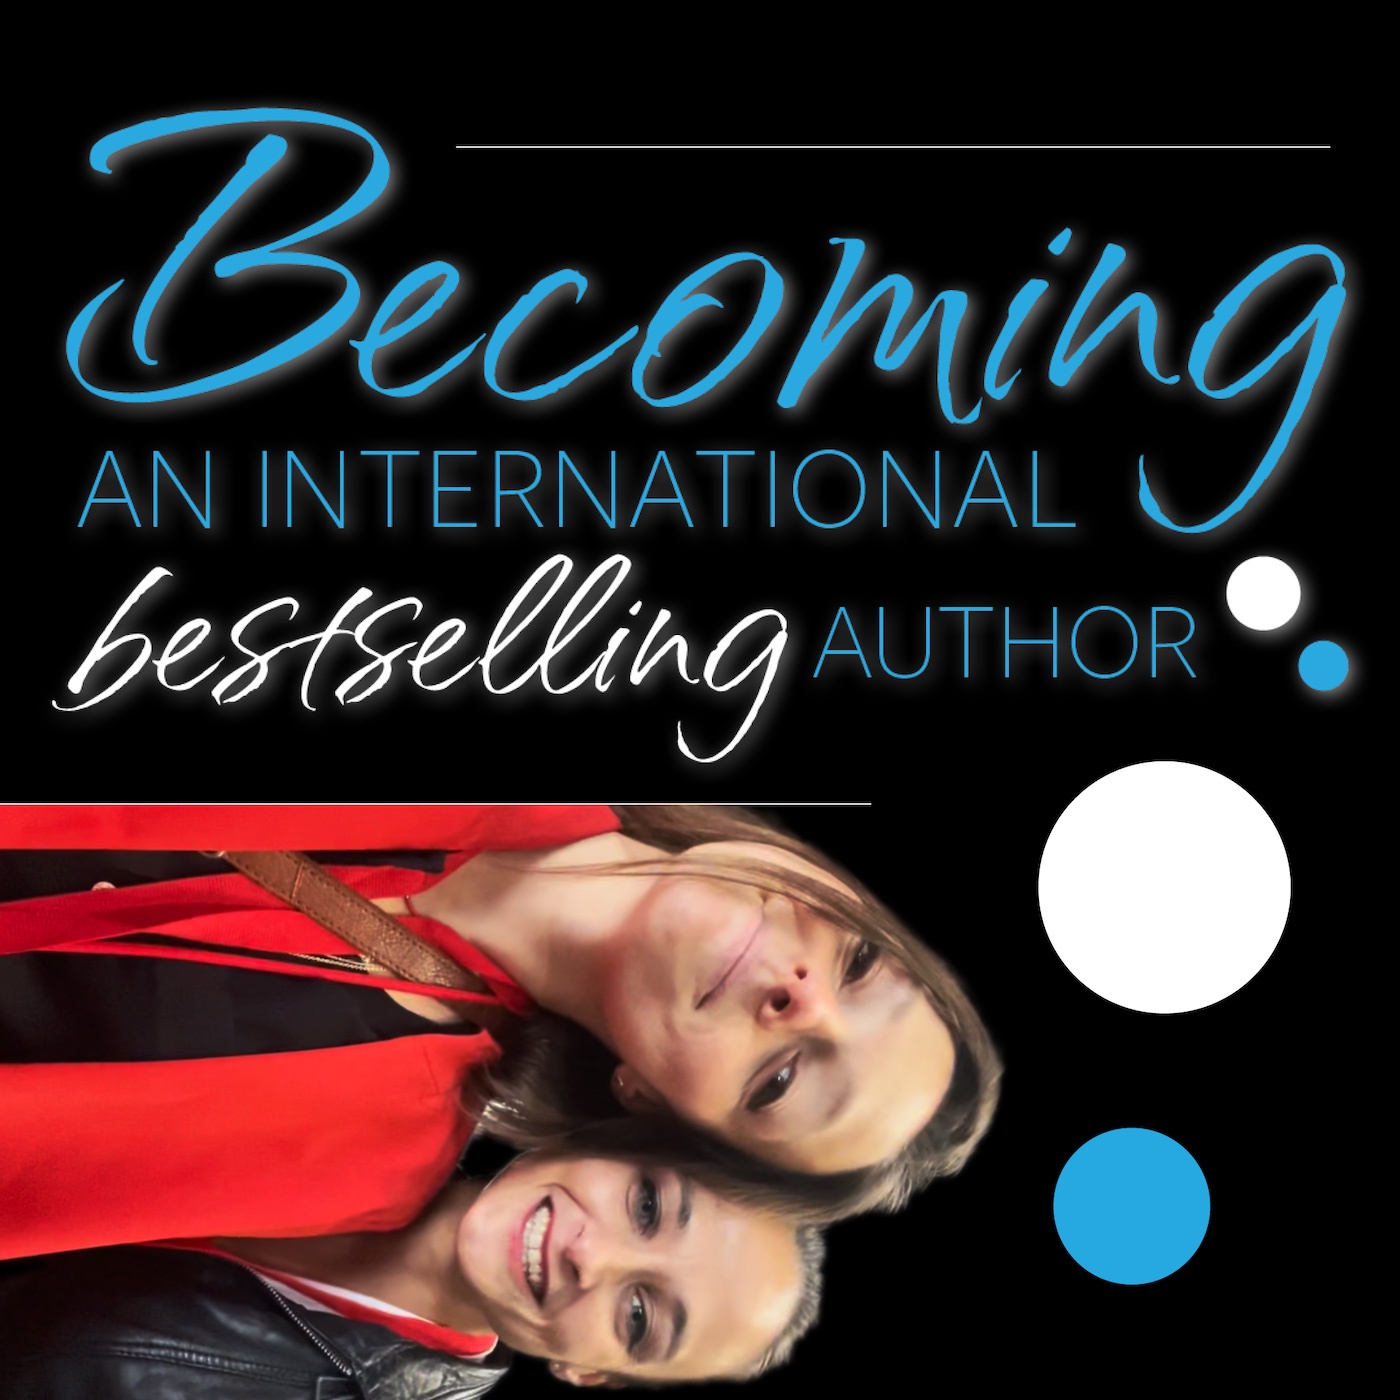 Becoming an international bestselling author